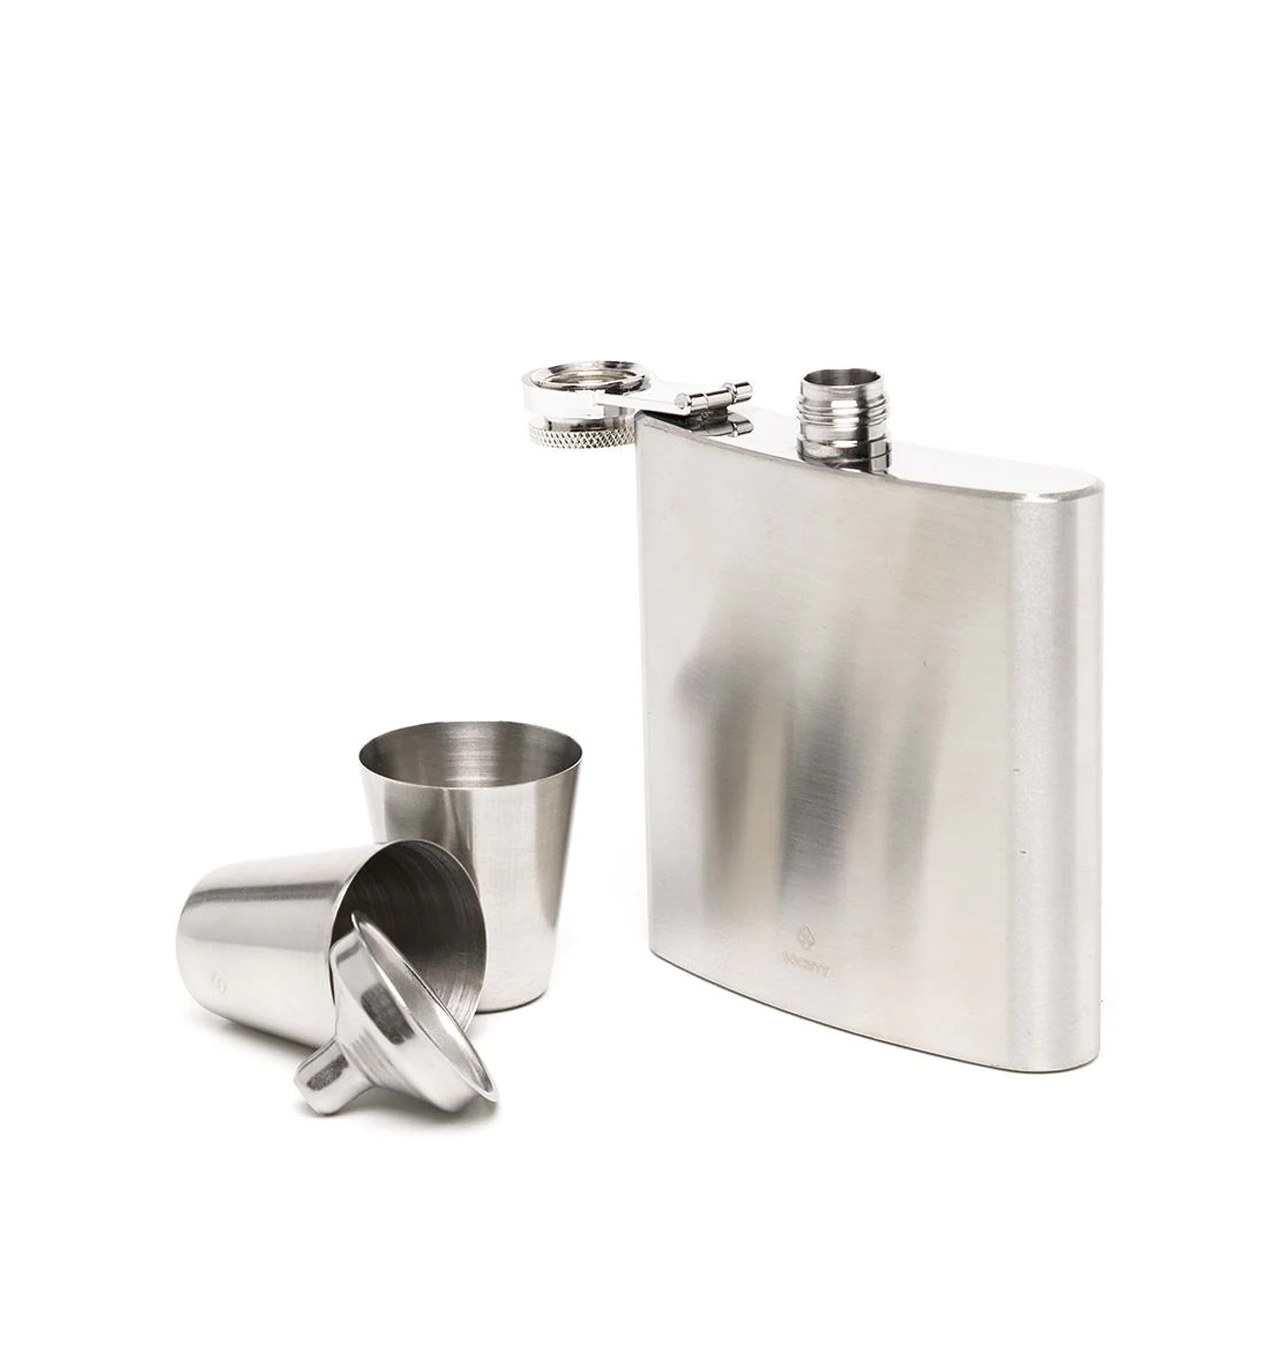 Society---Flask-and-Shot-Glass-Set---Stainless-Steel1